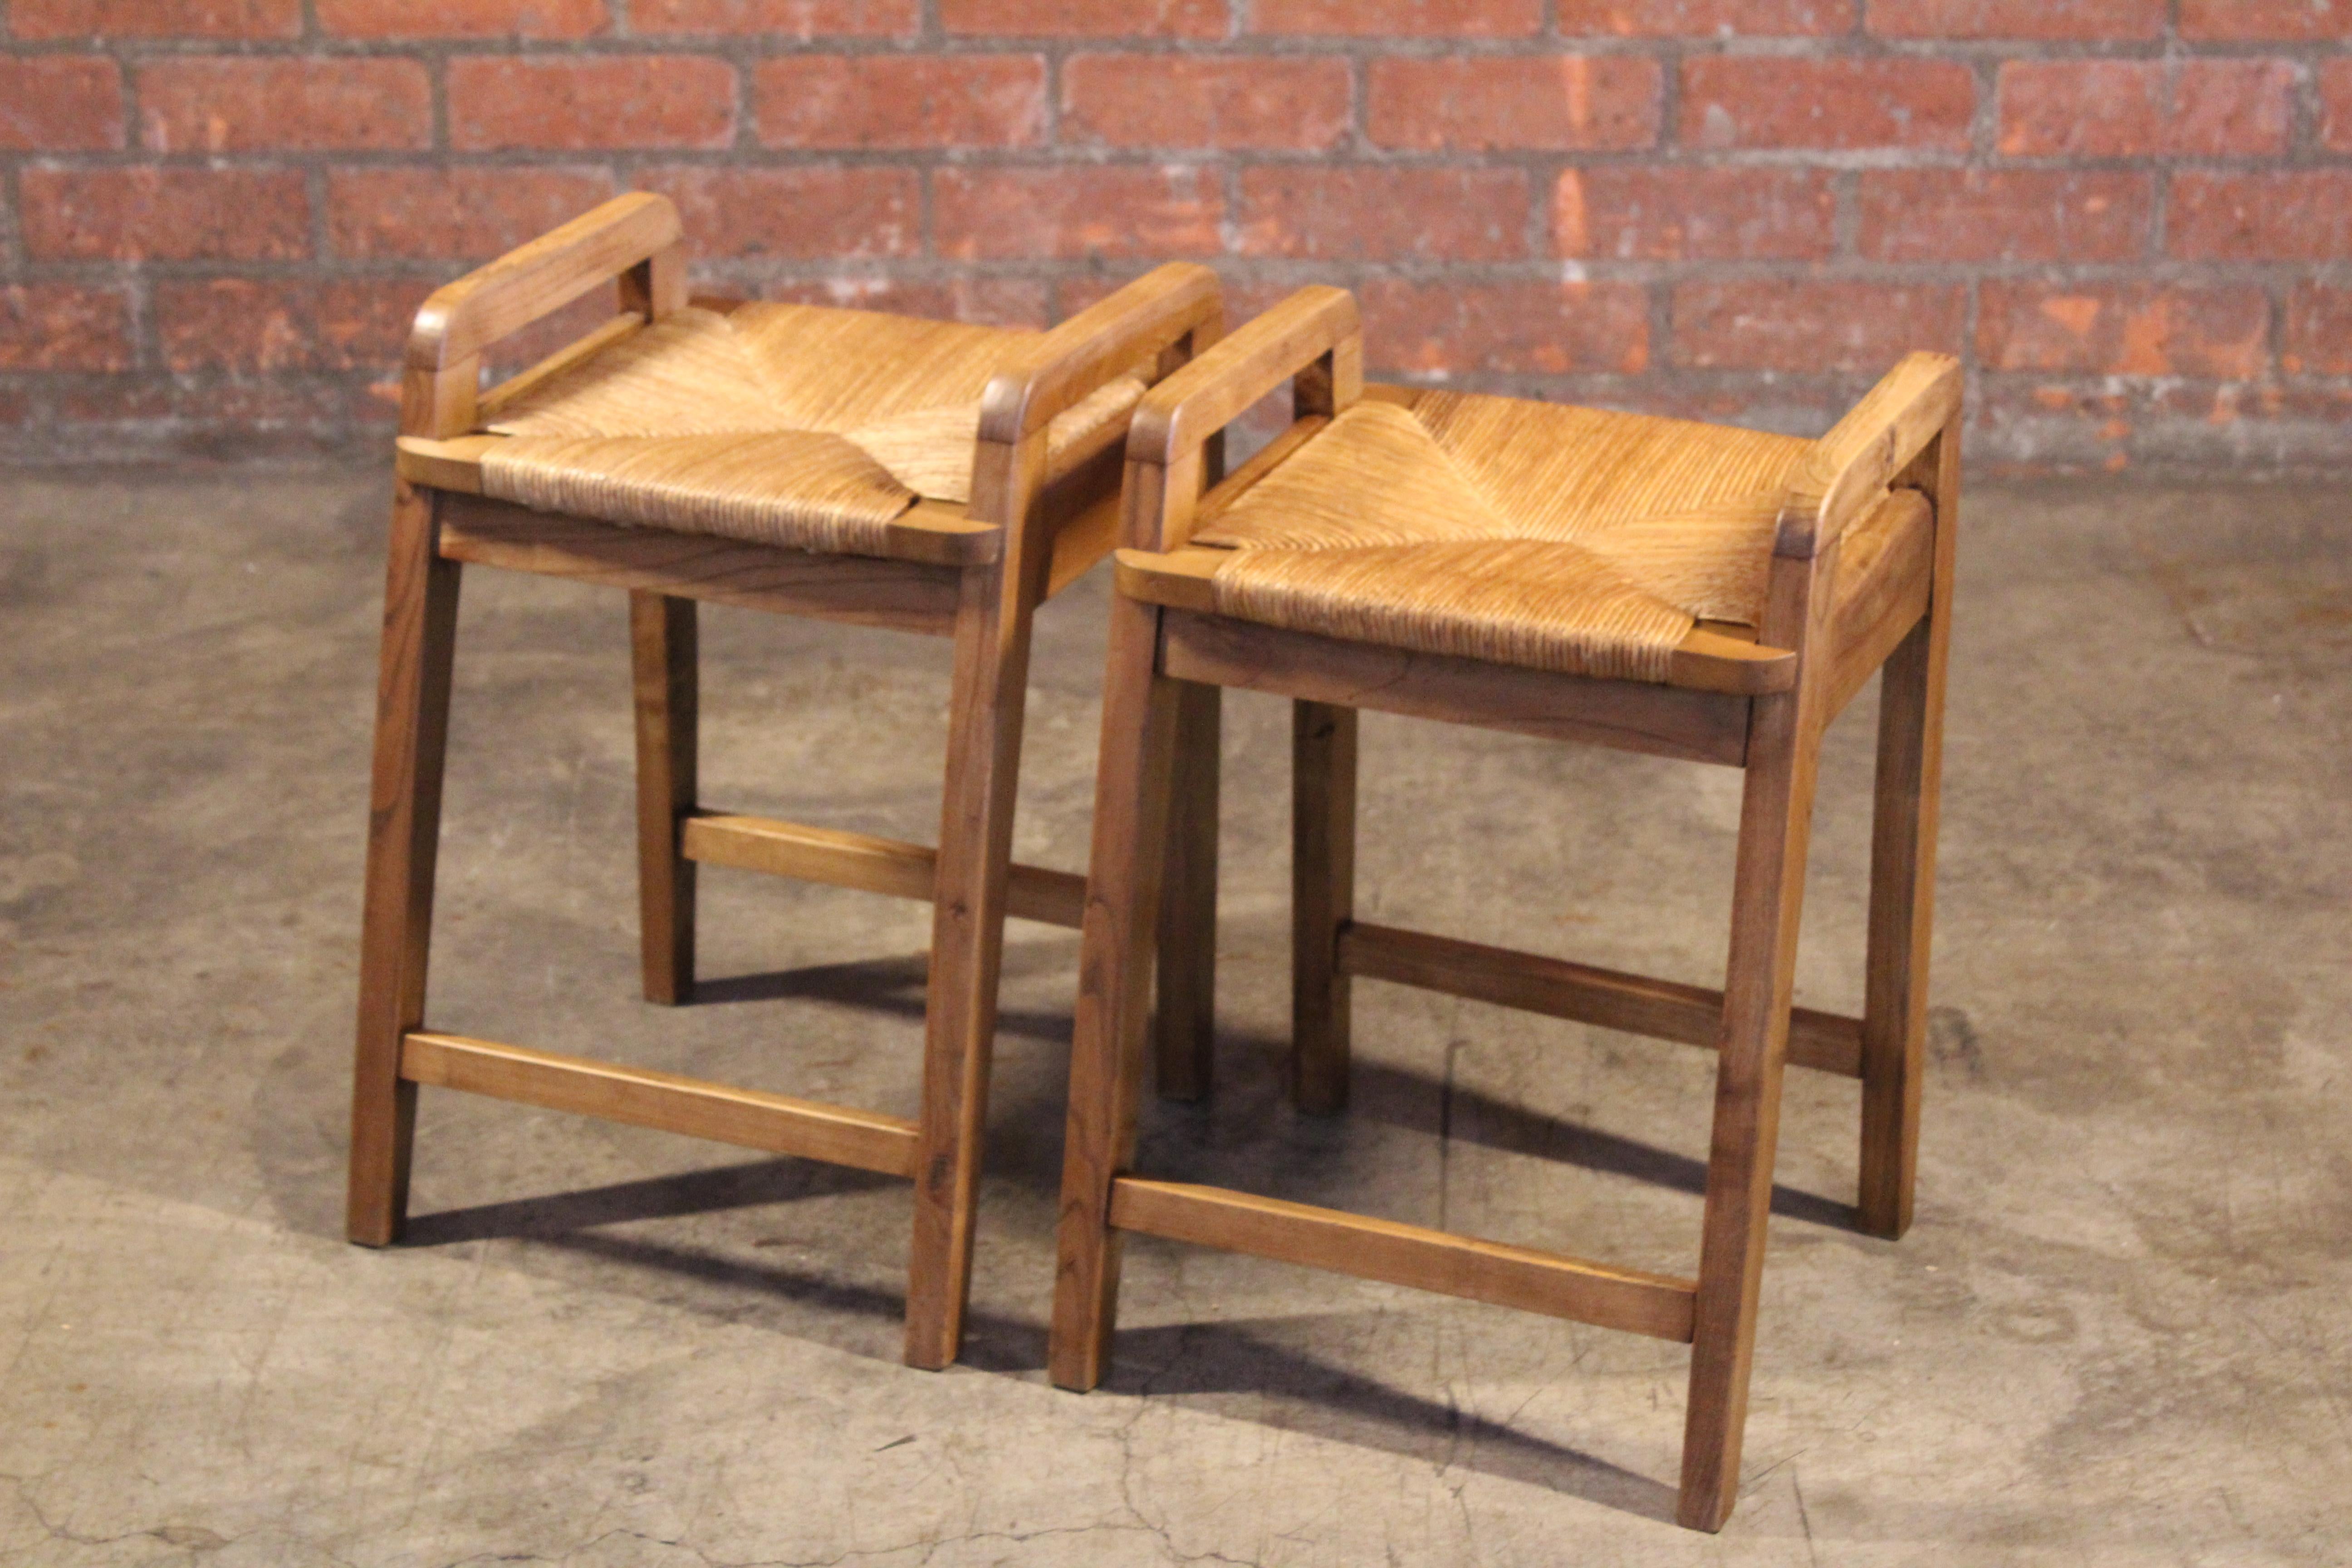 Pair of vintage oak stools with rush seats from France, 1950s. Sold as a pair, they are in excellent condition.